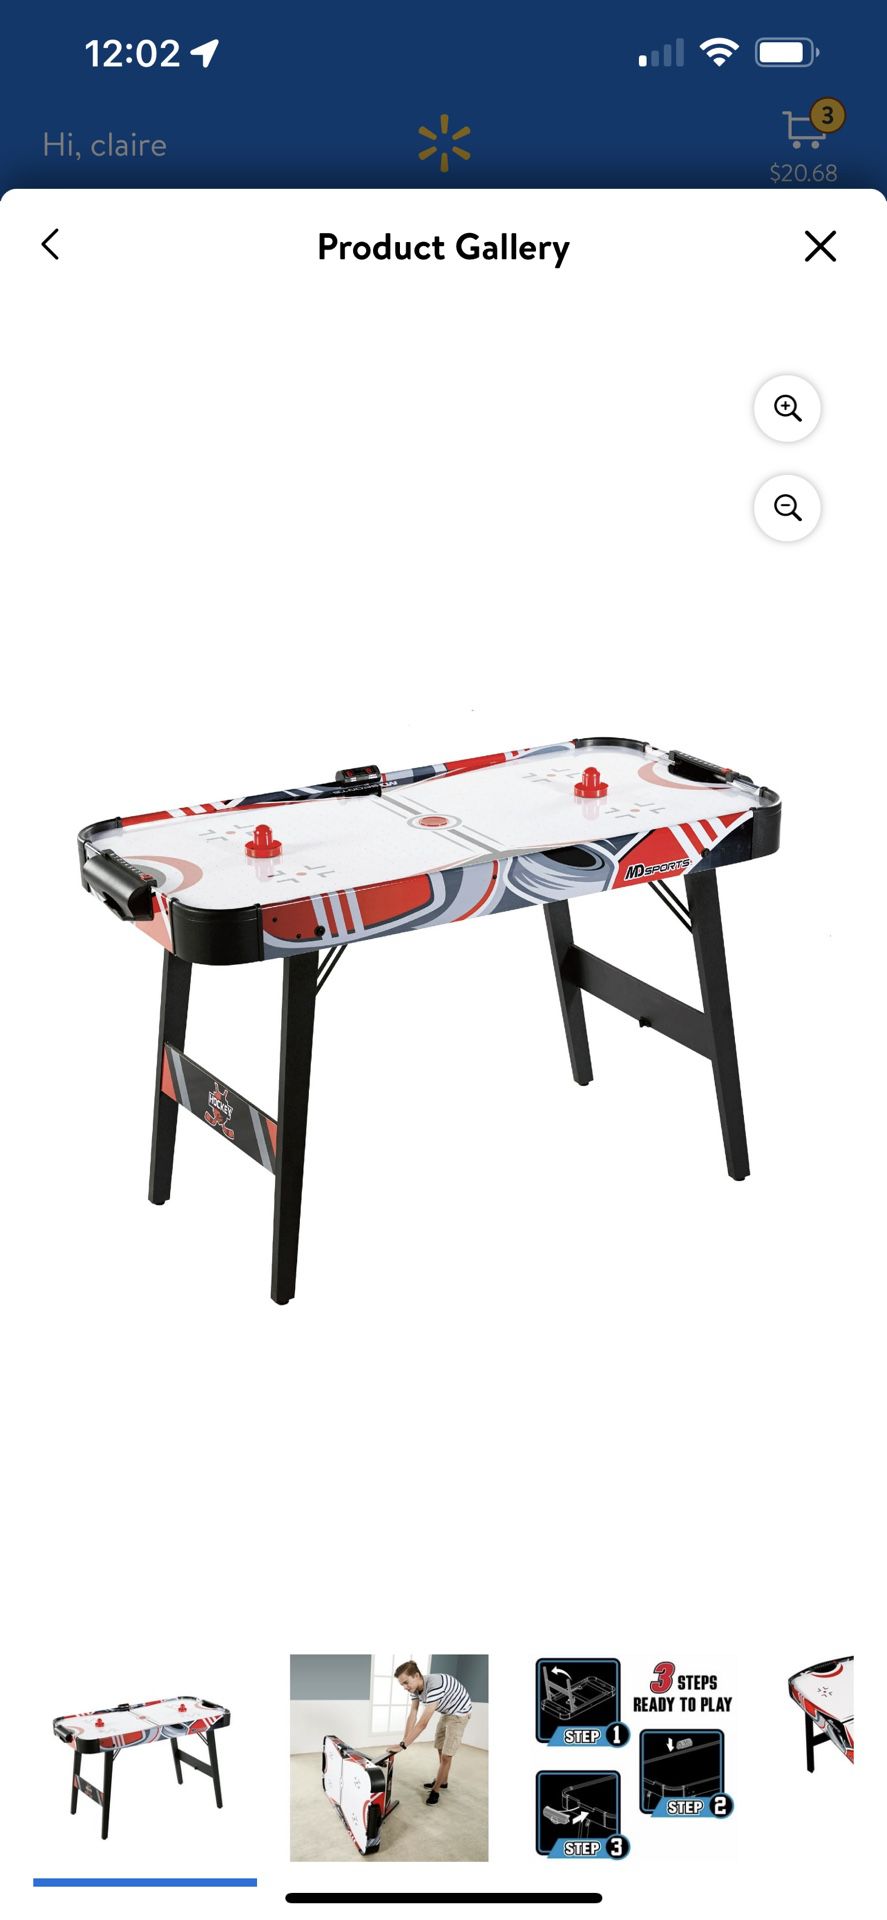 MD Sports Easy Assembly 48" Air Powered Hockey Table, Compact Storage/Foldable Legs, Red/Black